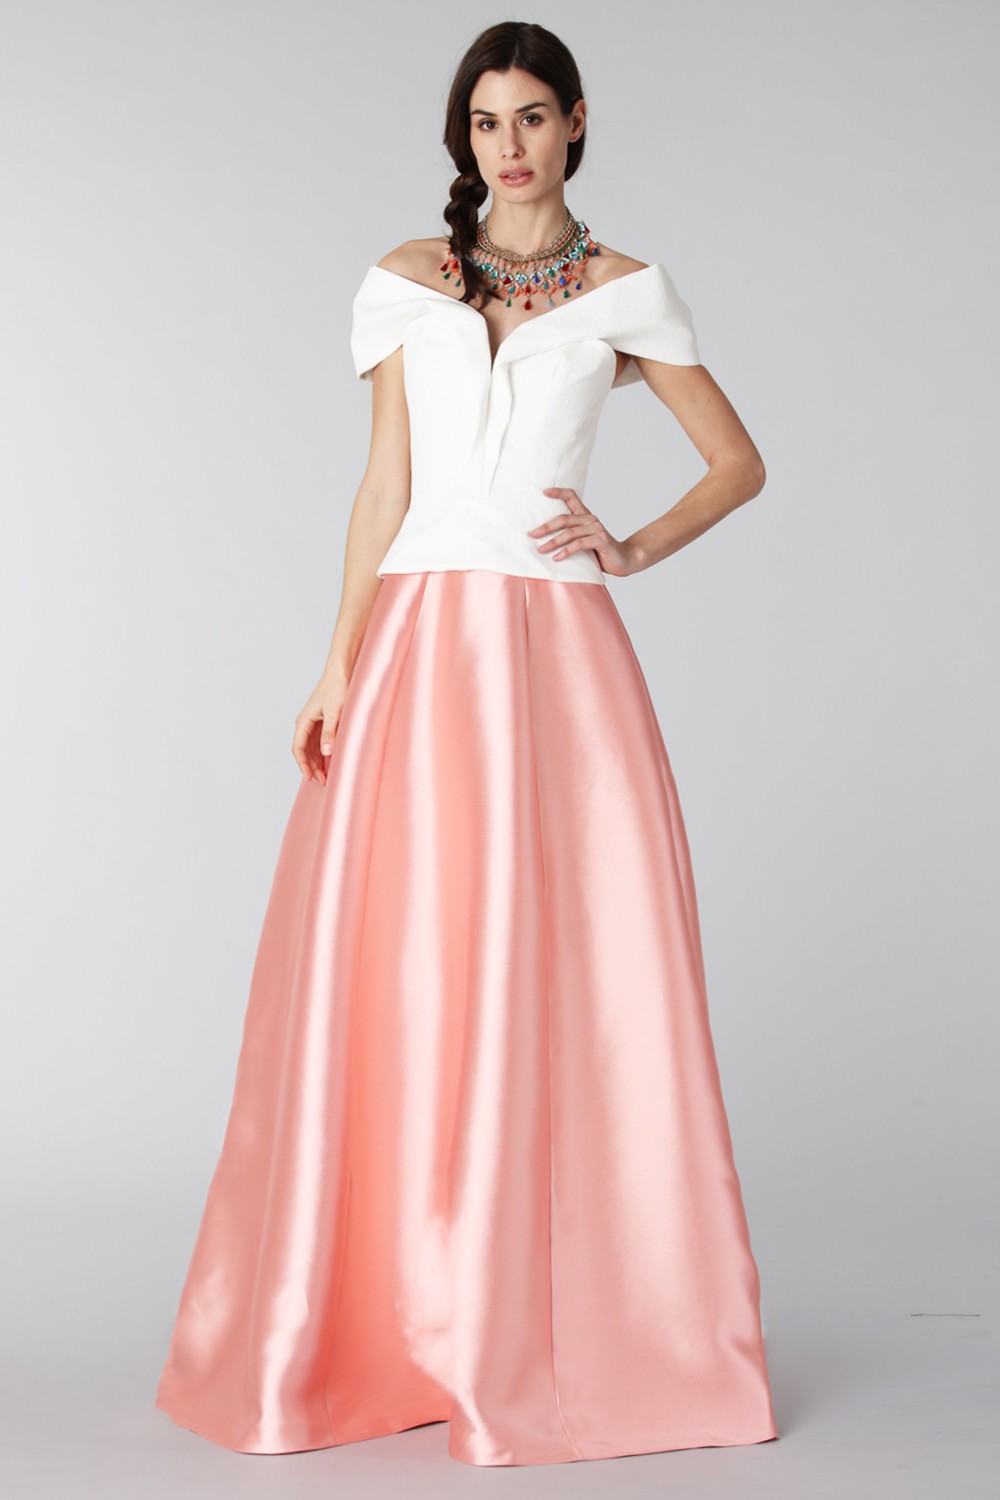 Complete pink skirt and white silk top